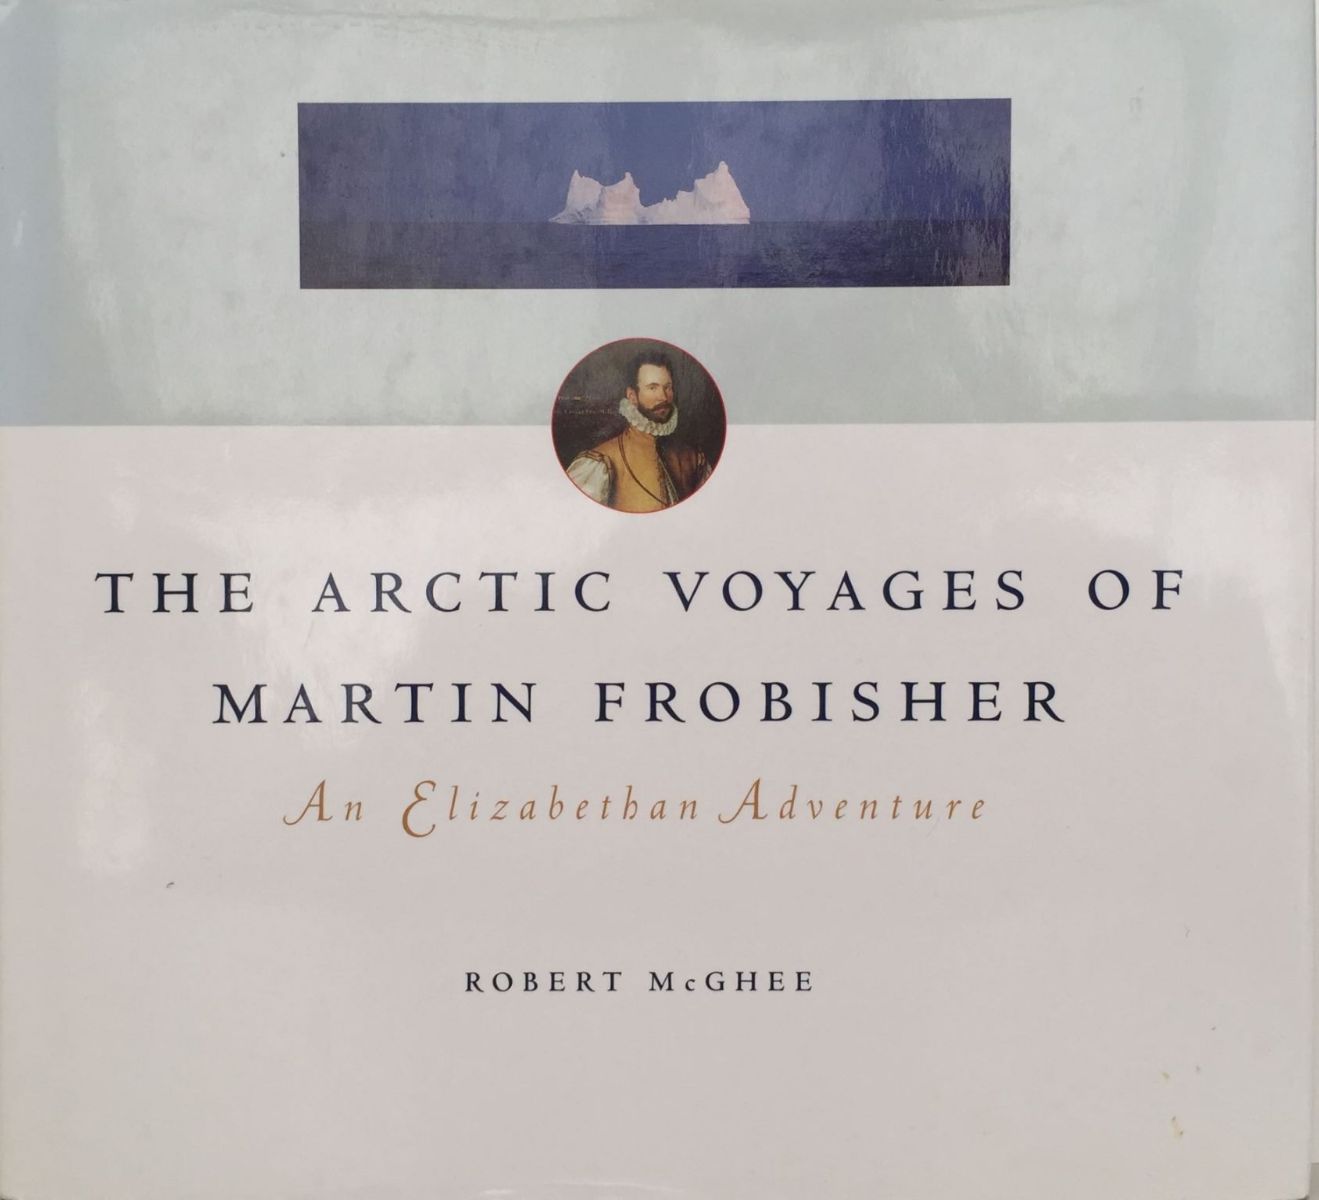 THE ARCTIC VOYAGES OF MARTIN FROBISHER: An Elizabethan Adventure